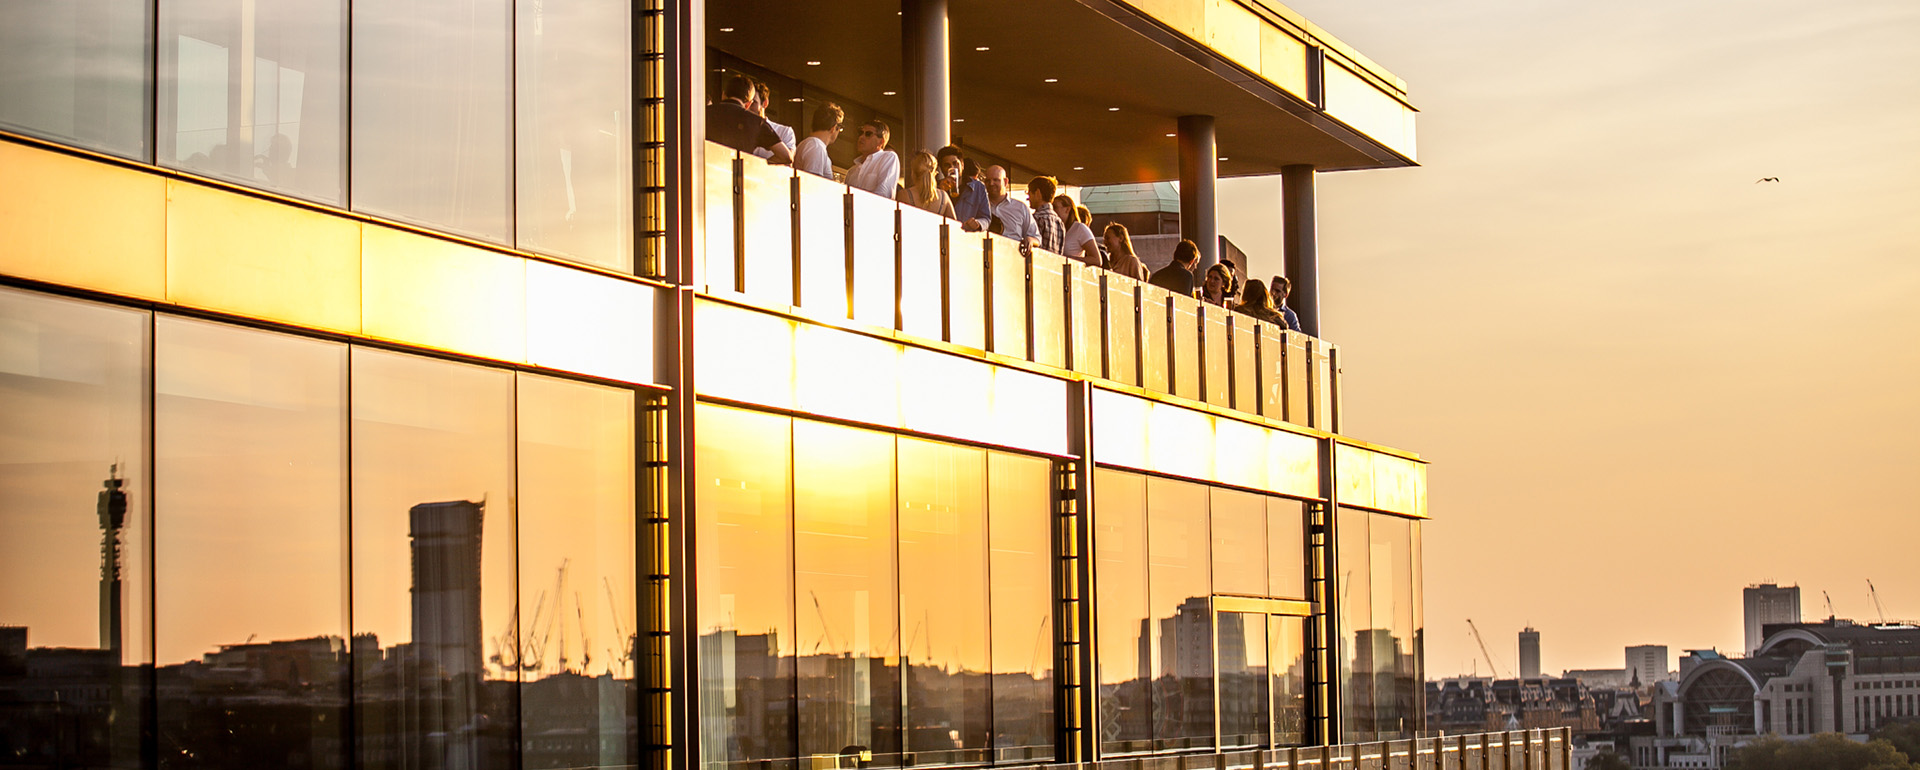 Exterior sunset shot of guests on a balcony